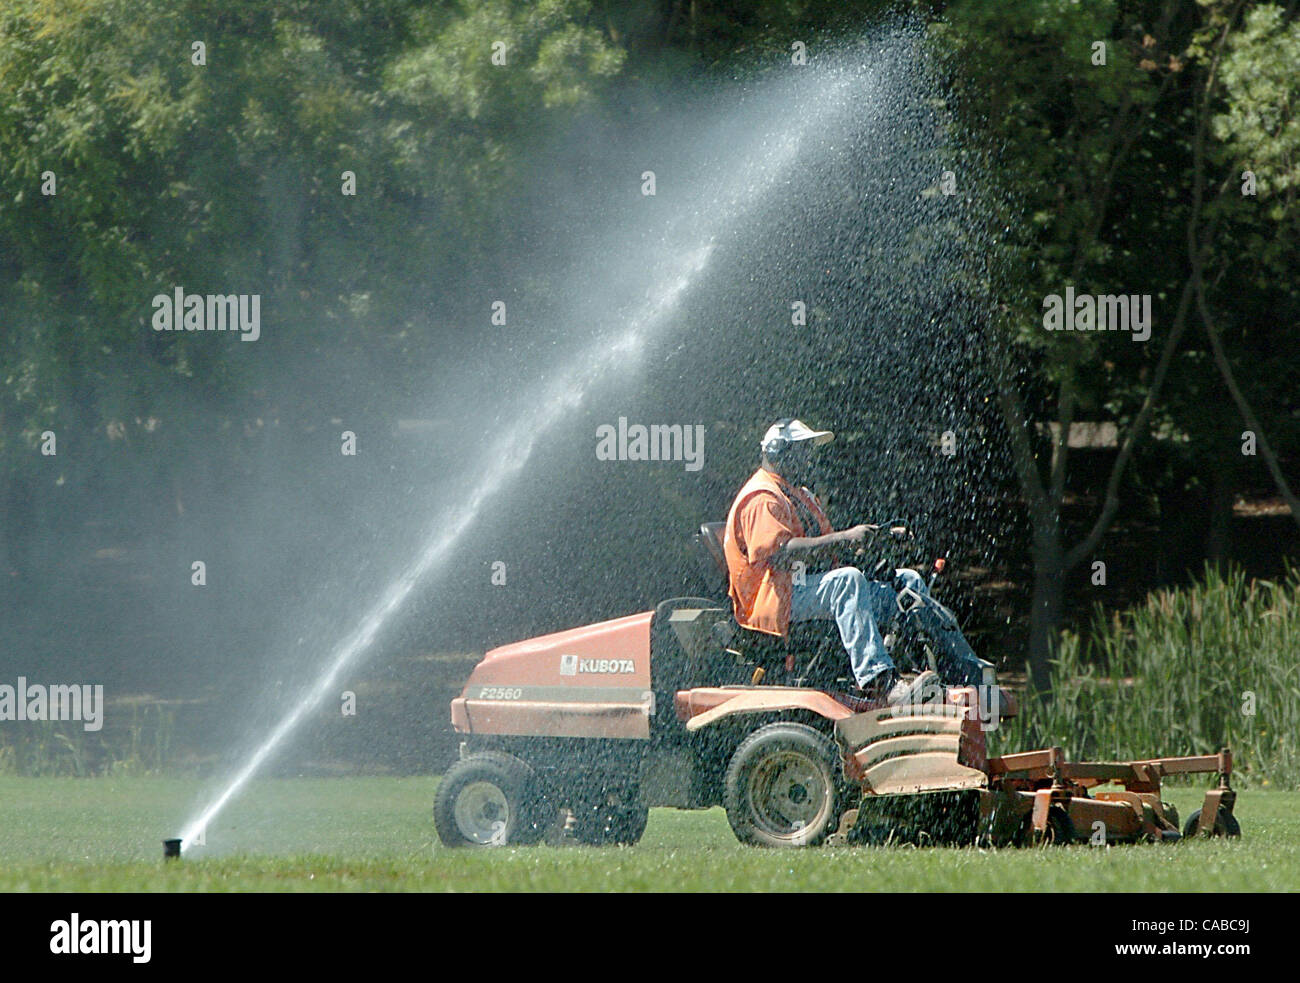 Paul Jet flirts with the water as he drives his lawnmower perilously close to a sprinkler Wednesday, June 2, 2004, as he mows Hillcrest park in Concord, Calif.  Jet, who works for the city of Concord, probably didn't mind a few sprinkles as the temperaturescontinued to climb    (Contra Costa Times/B Stock Photo